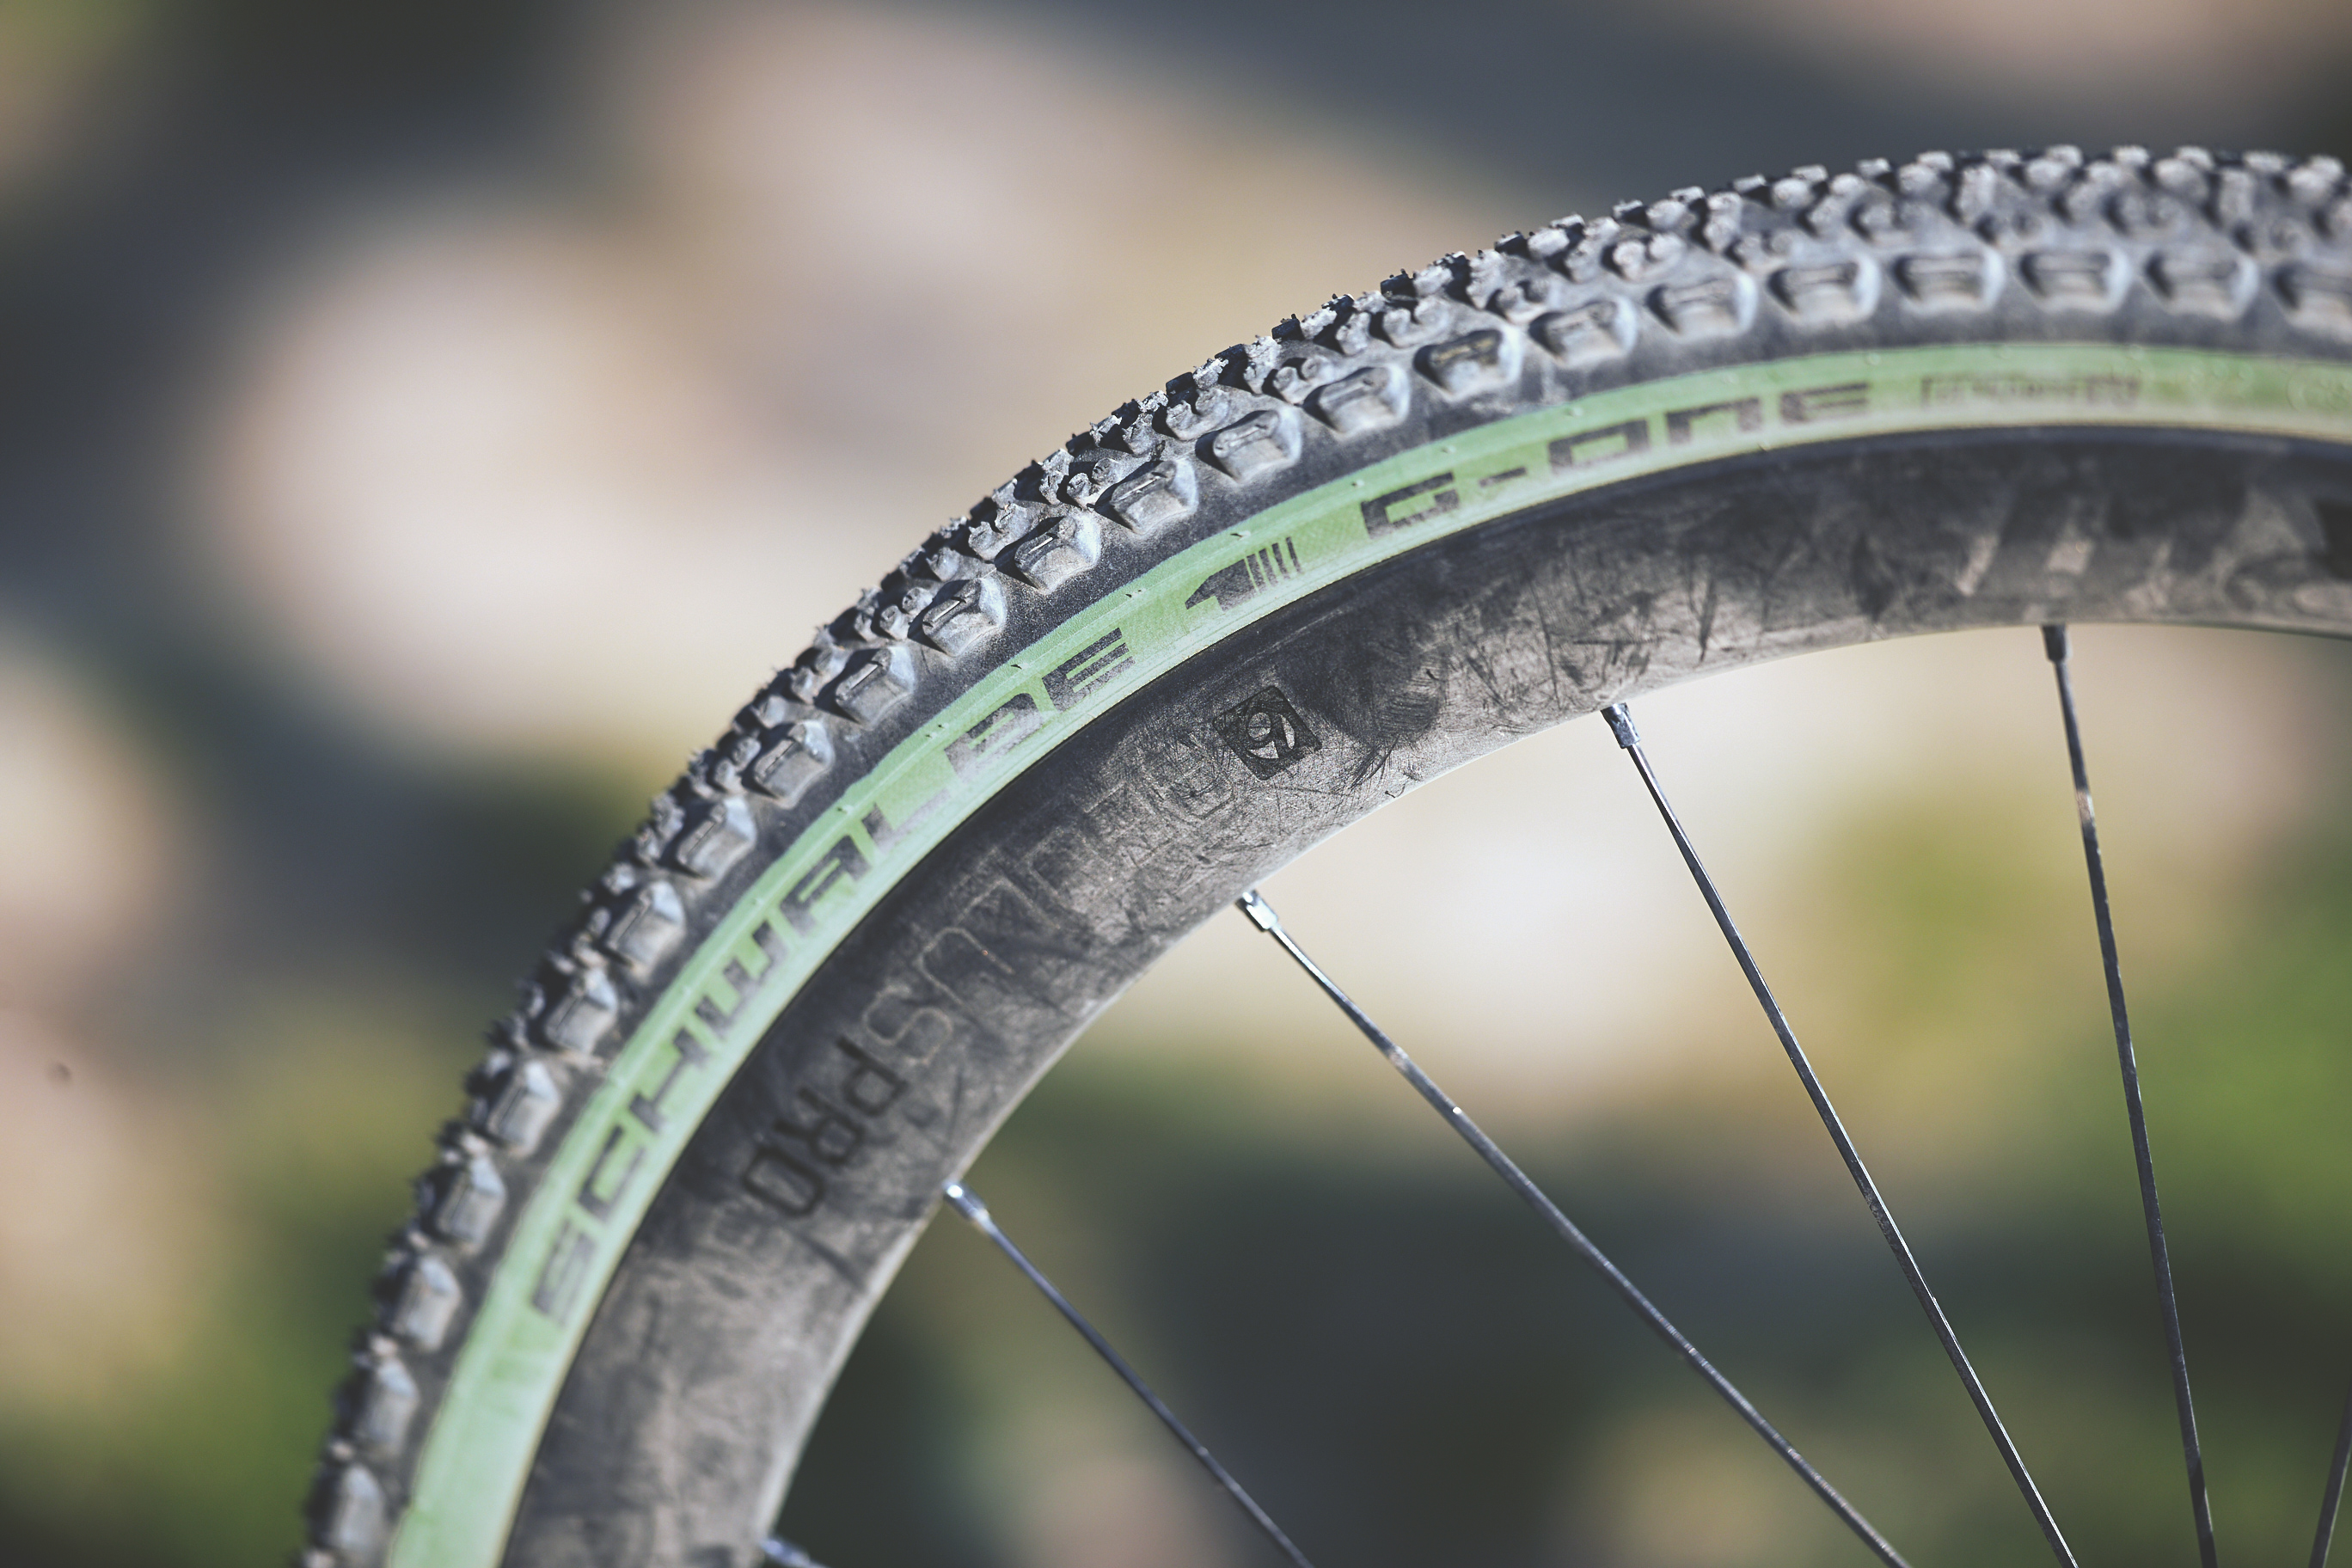  GRAVEL IN GREEN: SCHWALBE’S SPECIAL EDITION TIRE IN OLIVE-SKIN